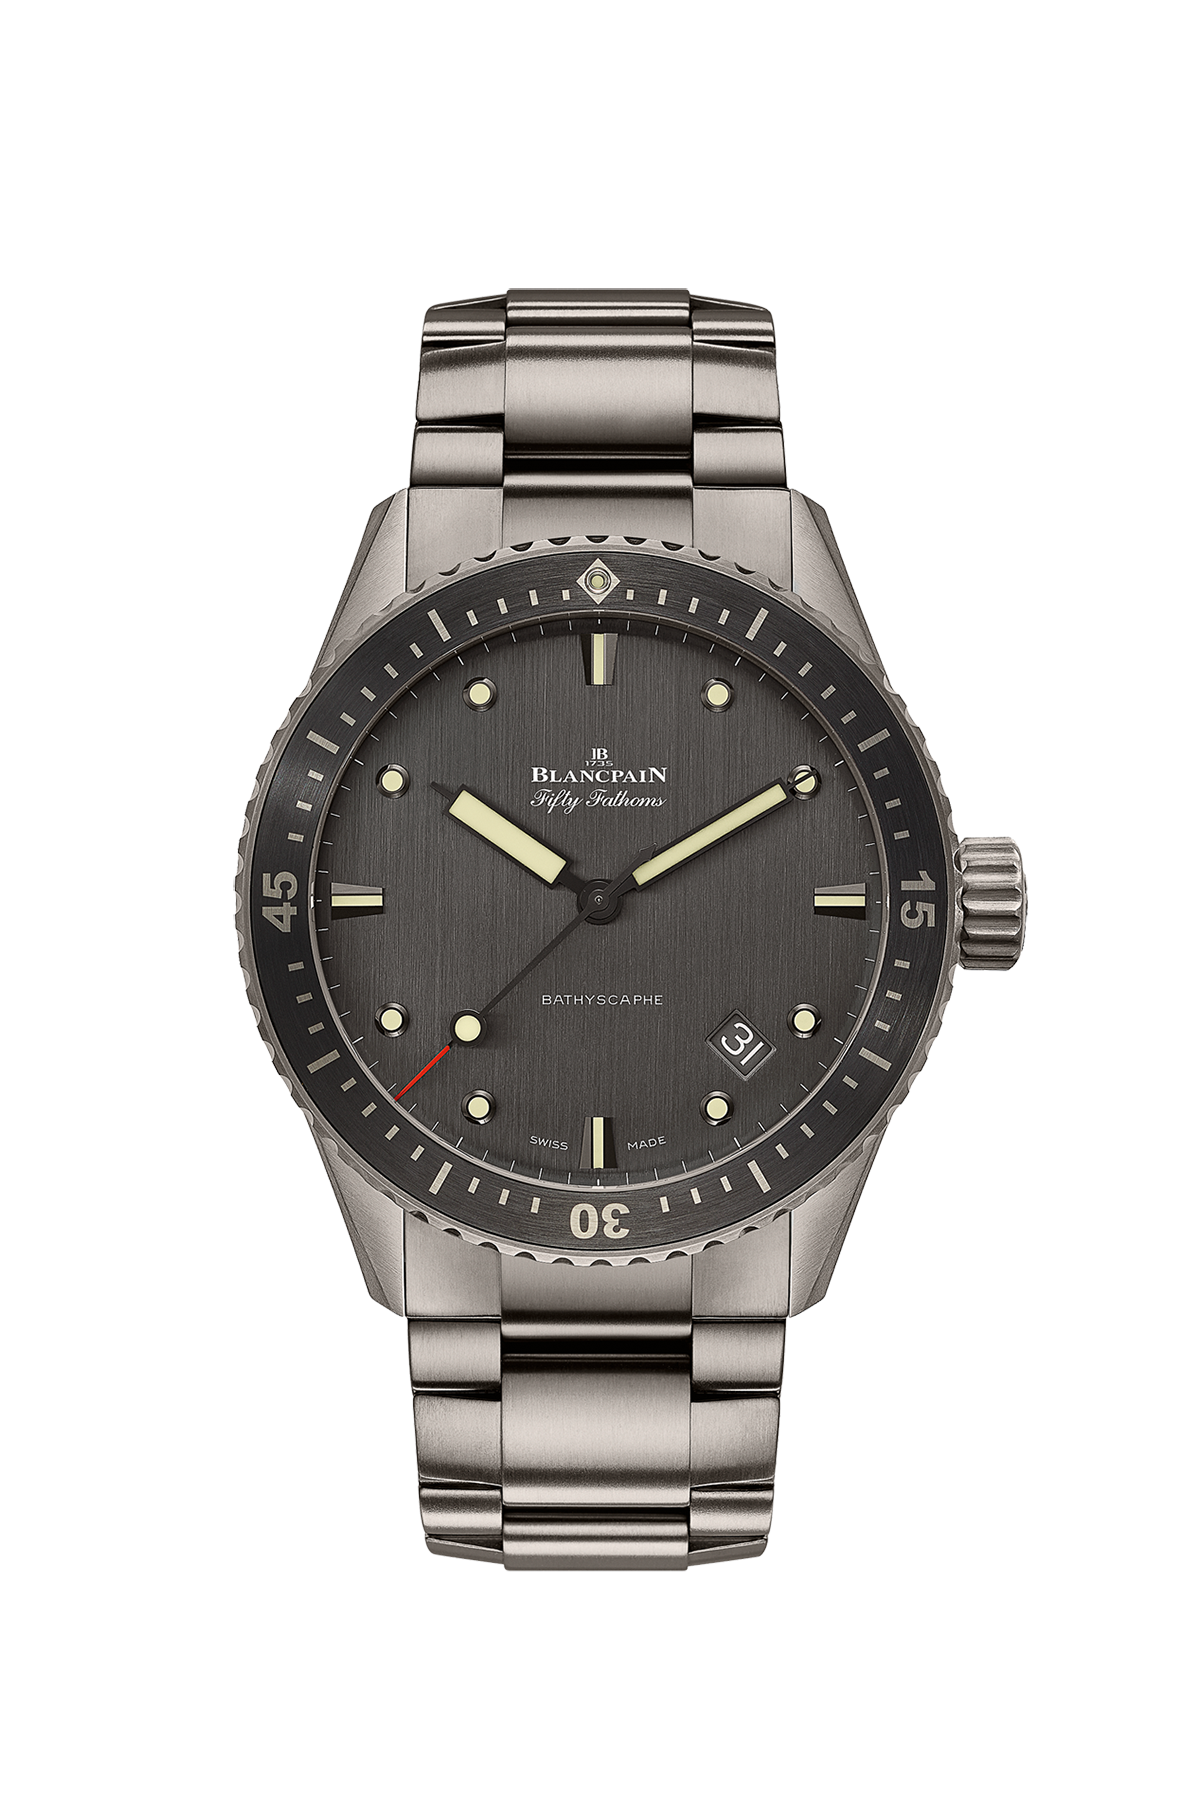 Blancpain Fifty Fathoms Bathyscaphe Watches Stainless Steel used | eBay